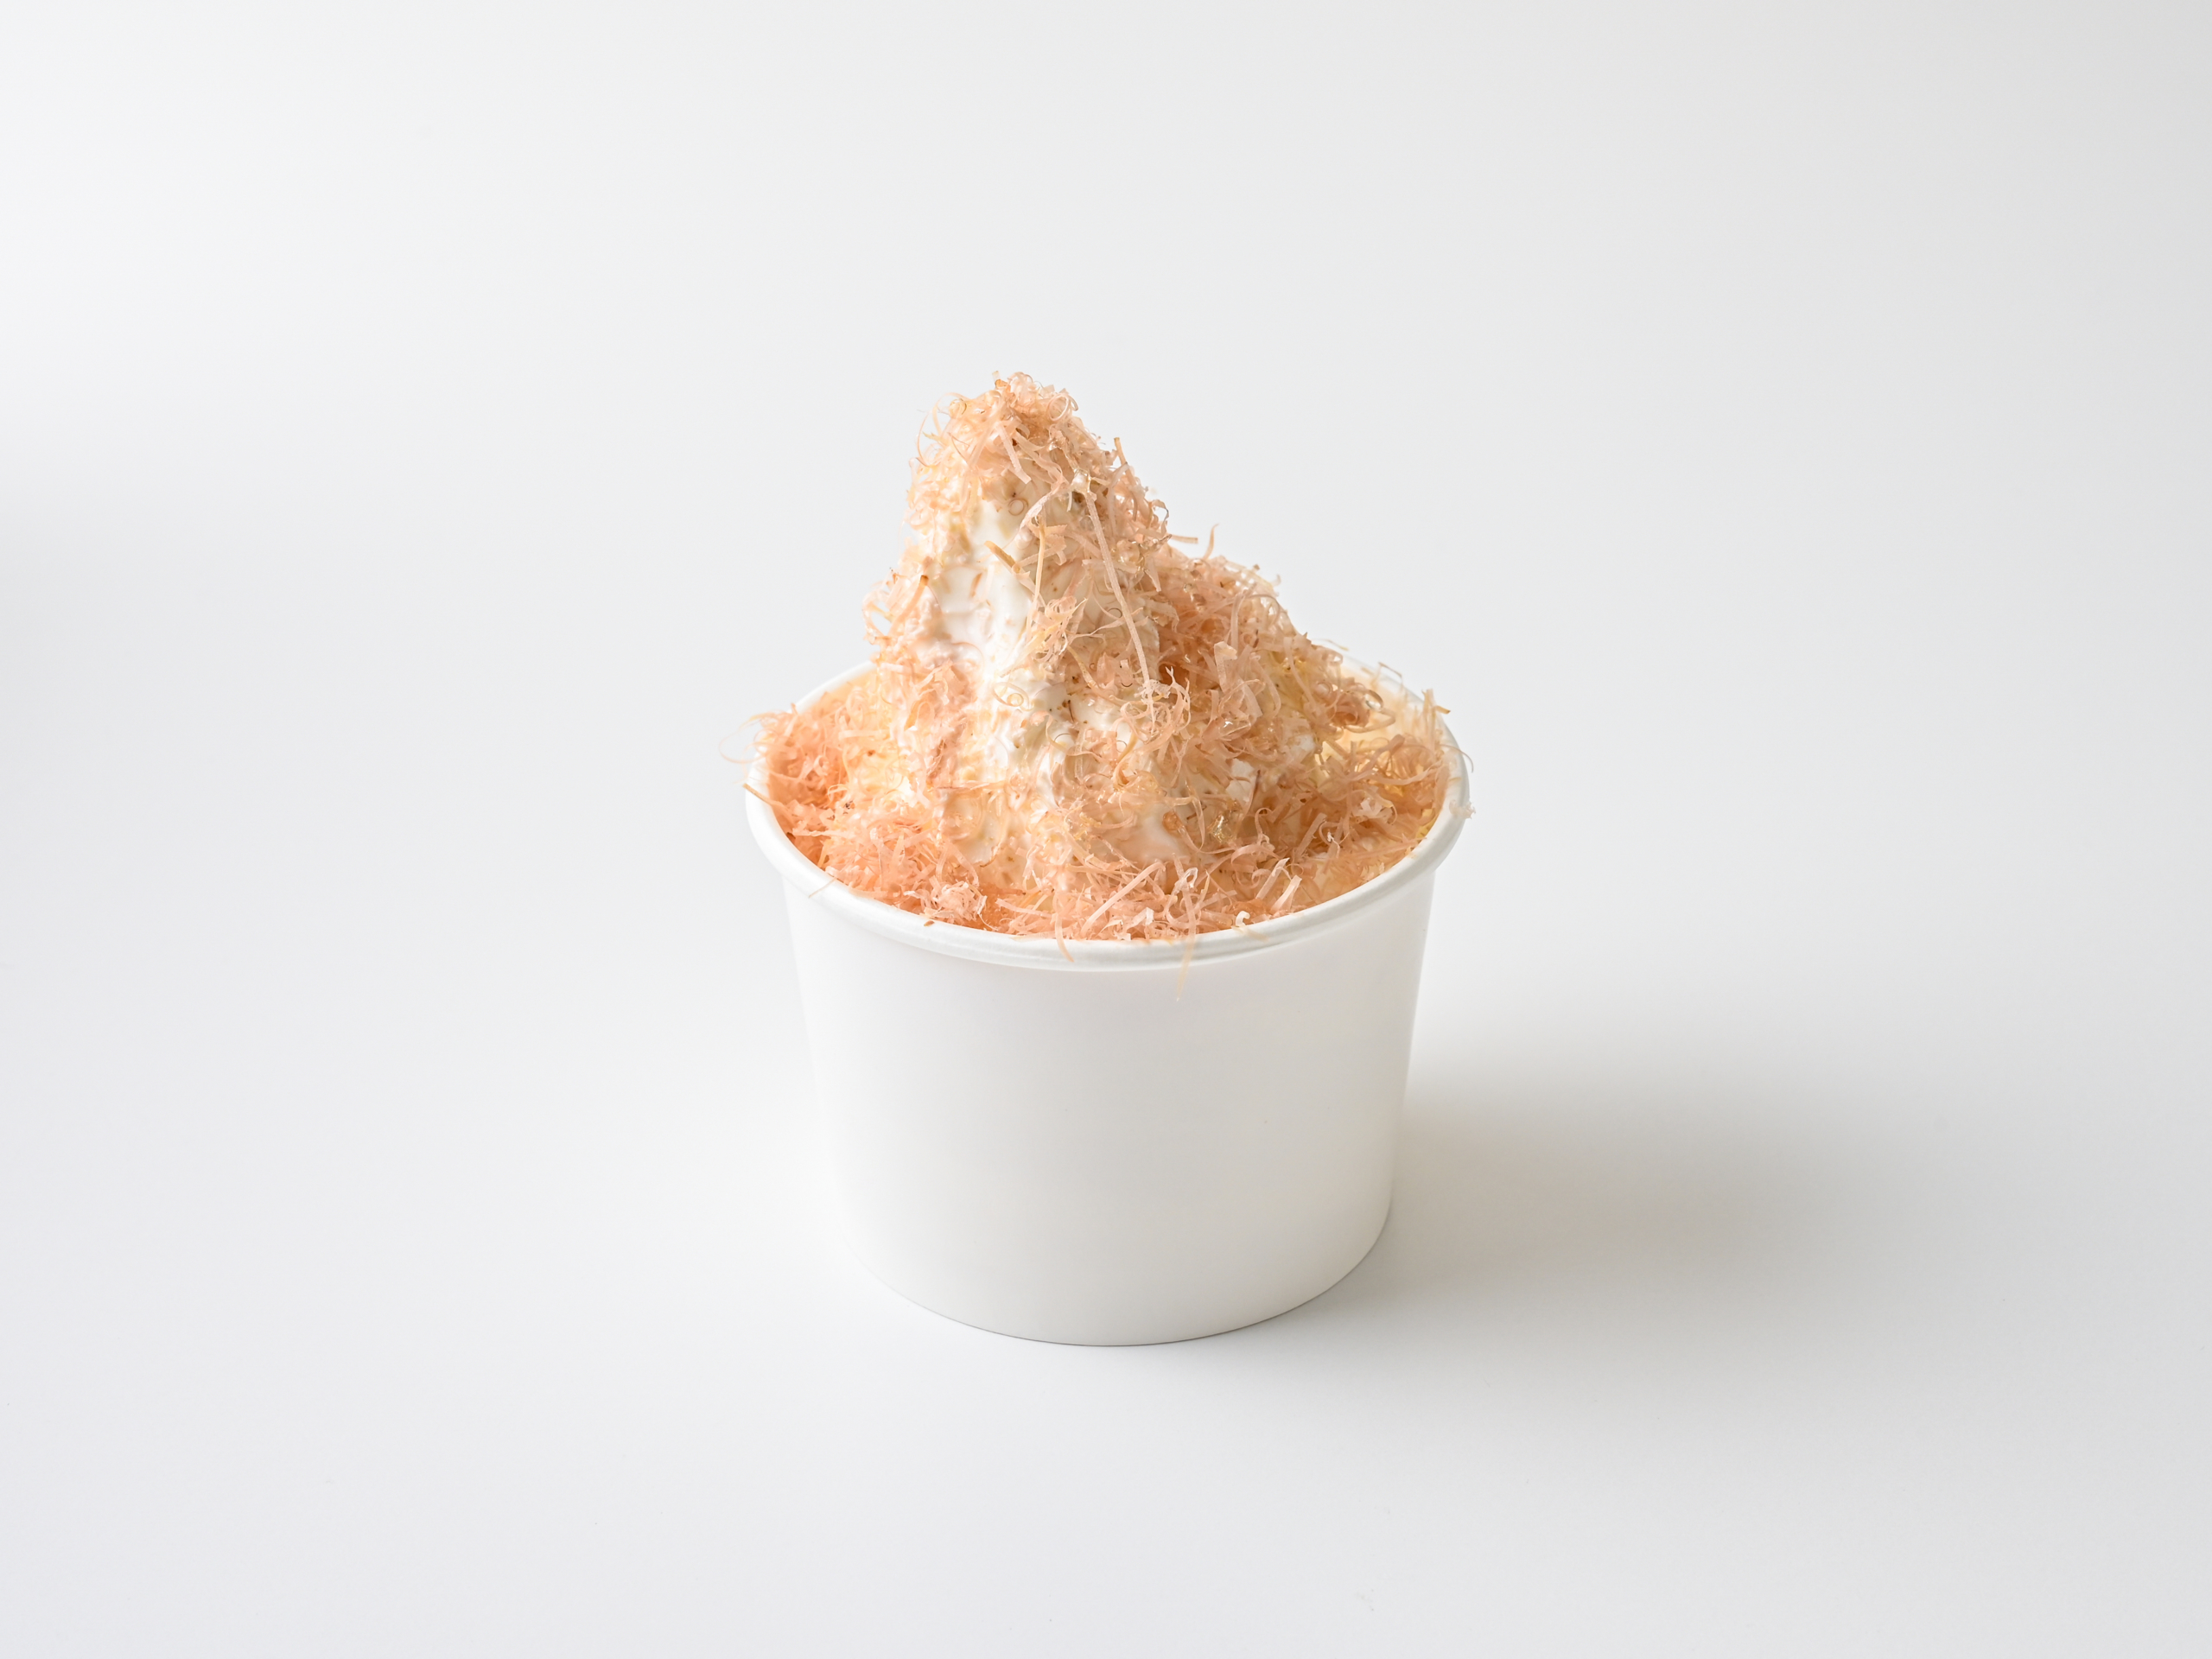 [Eitaro Sohonpo] Limited-edition summer kakigori (Japanese-style shaved ice) made with first-rate ingredients, only available at their Nihonbashi Main Store cafe